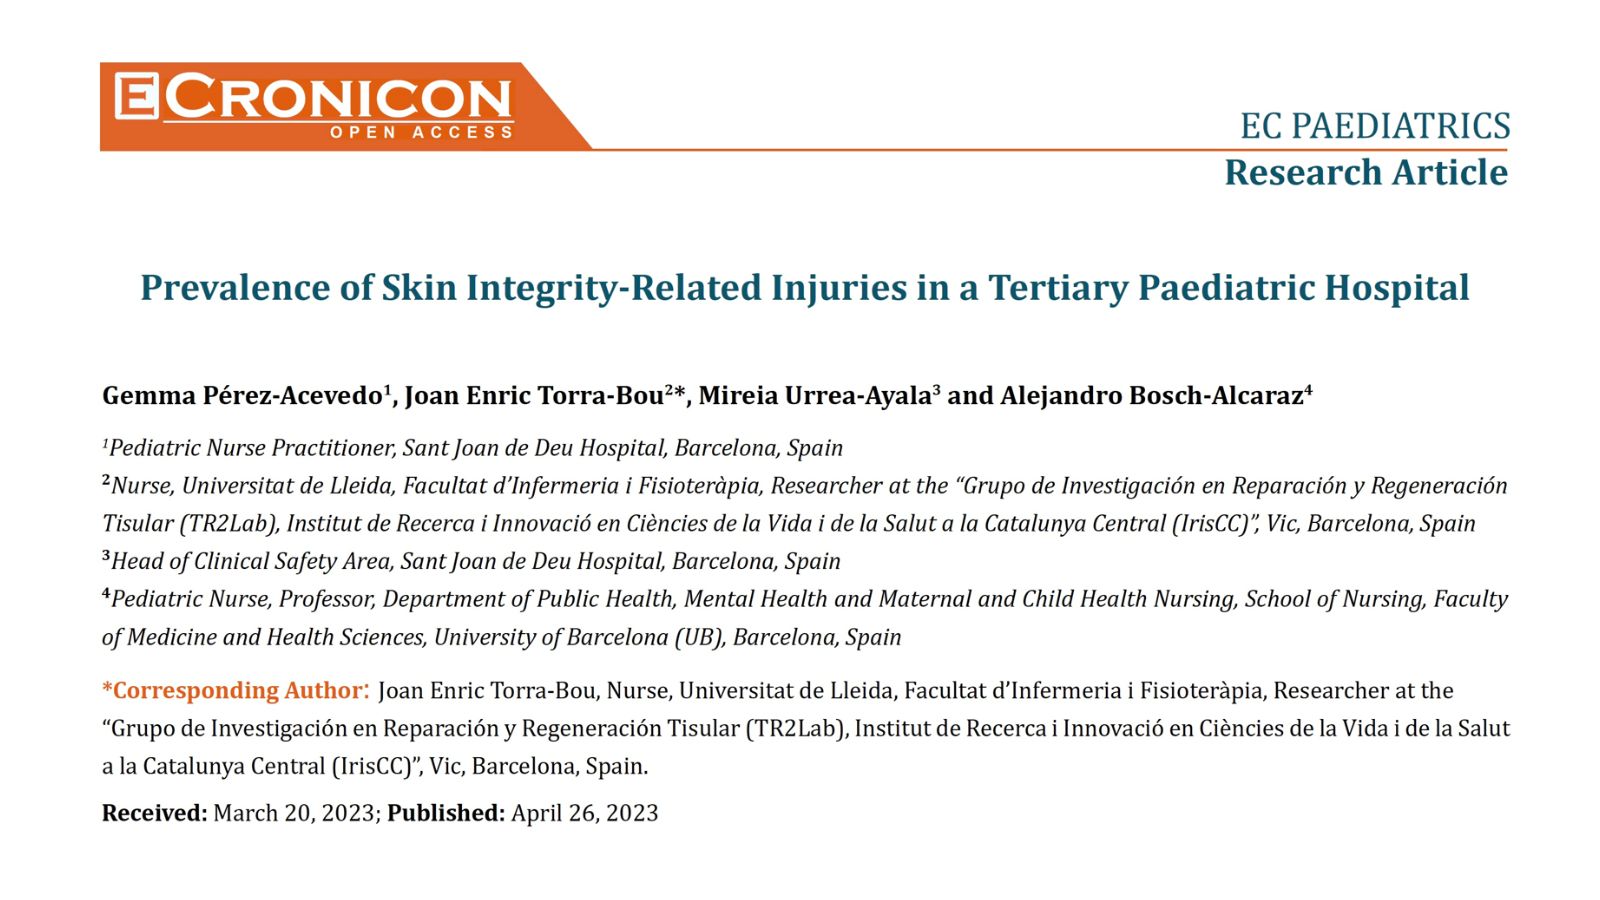 Prevalence of Skin Integrity-Related Injuries in a Tertiary Paediatric Hospital